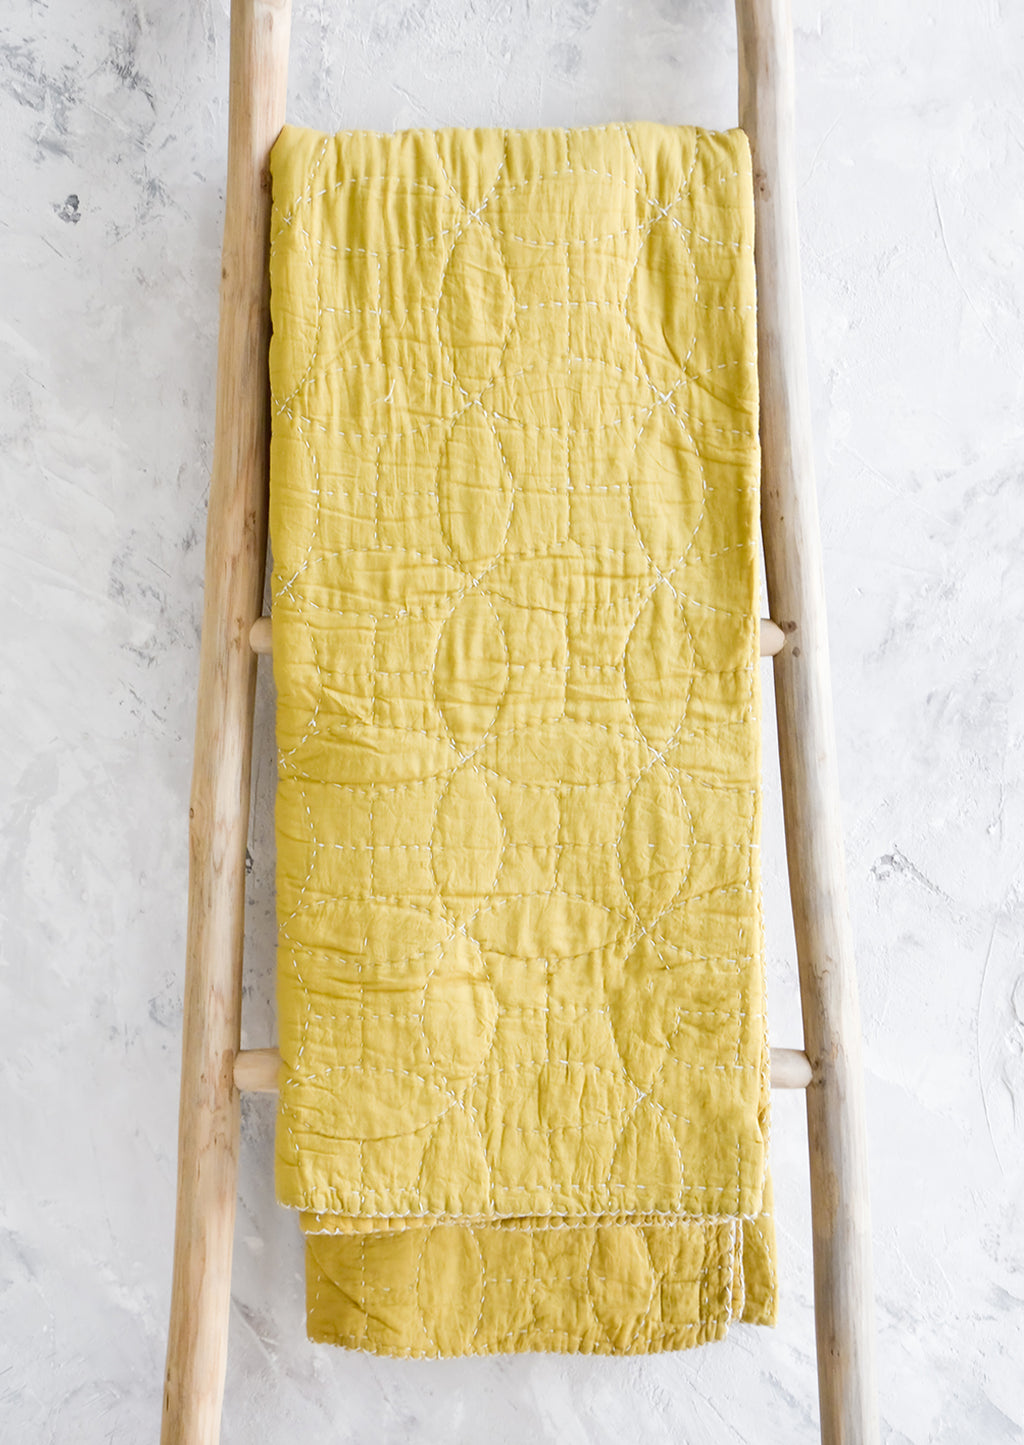 Chartreuse: Chartreuse colored cotton throw with overlapping circle patterned embroidery, hanging on display ladder